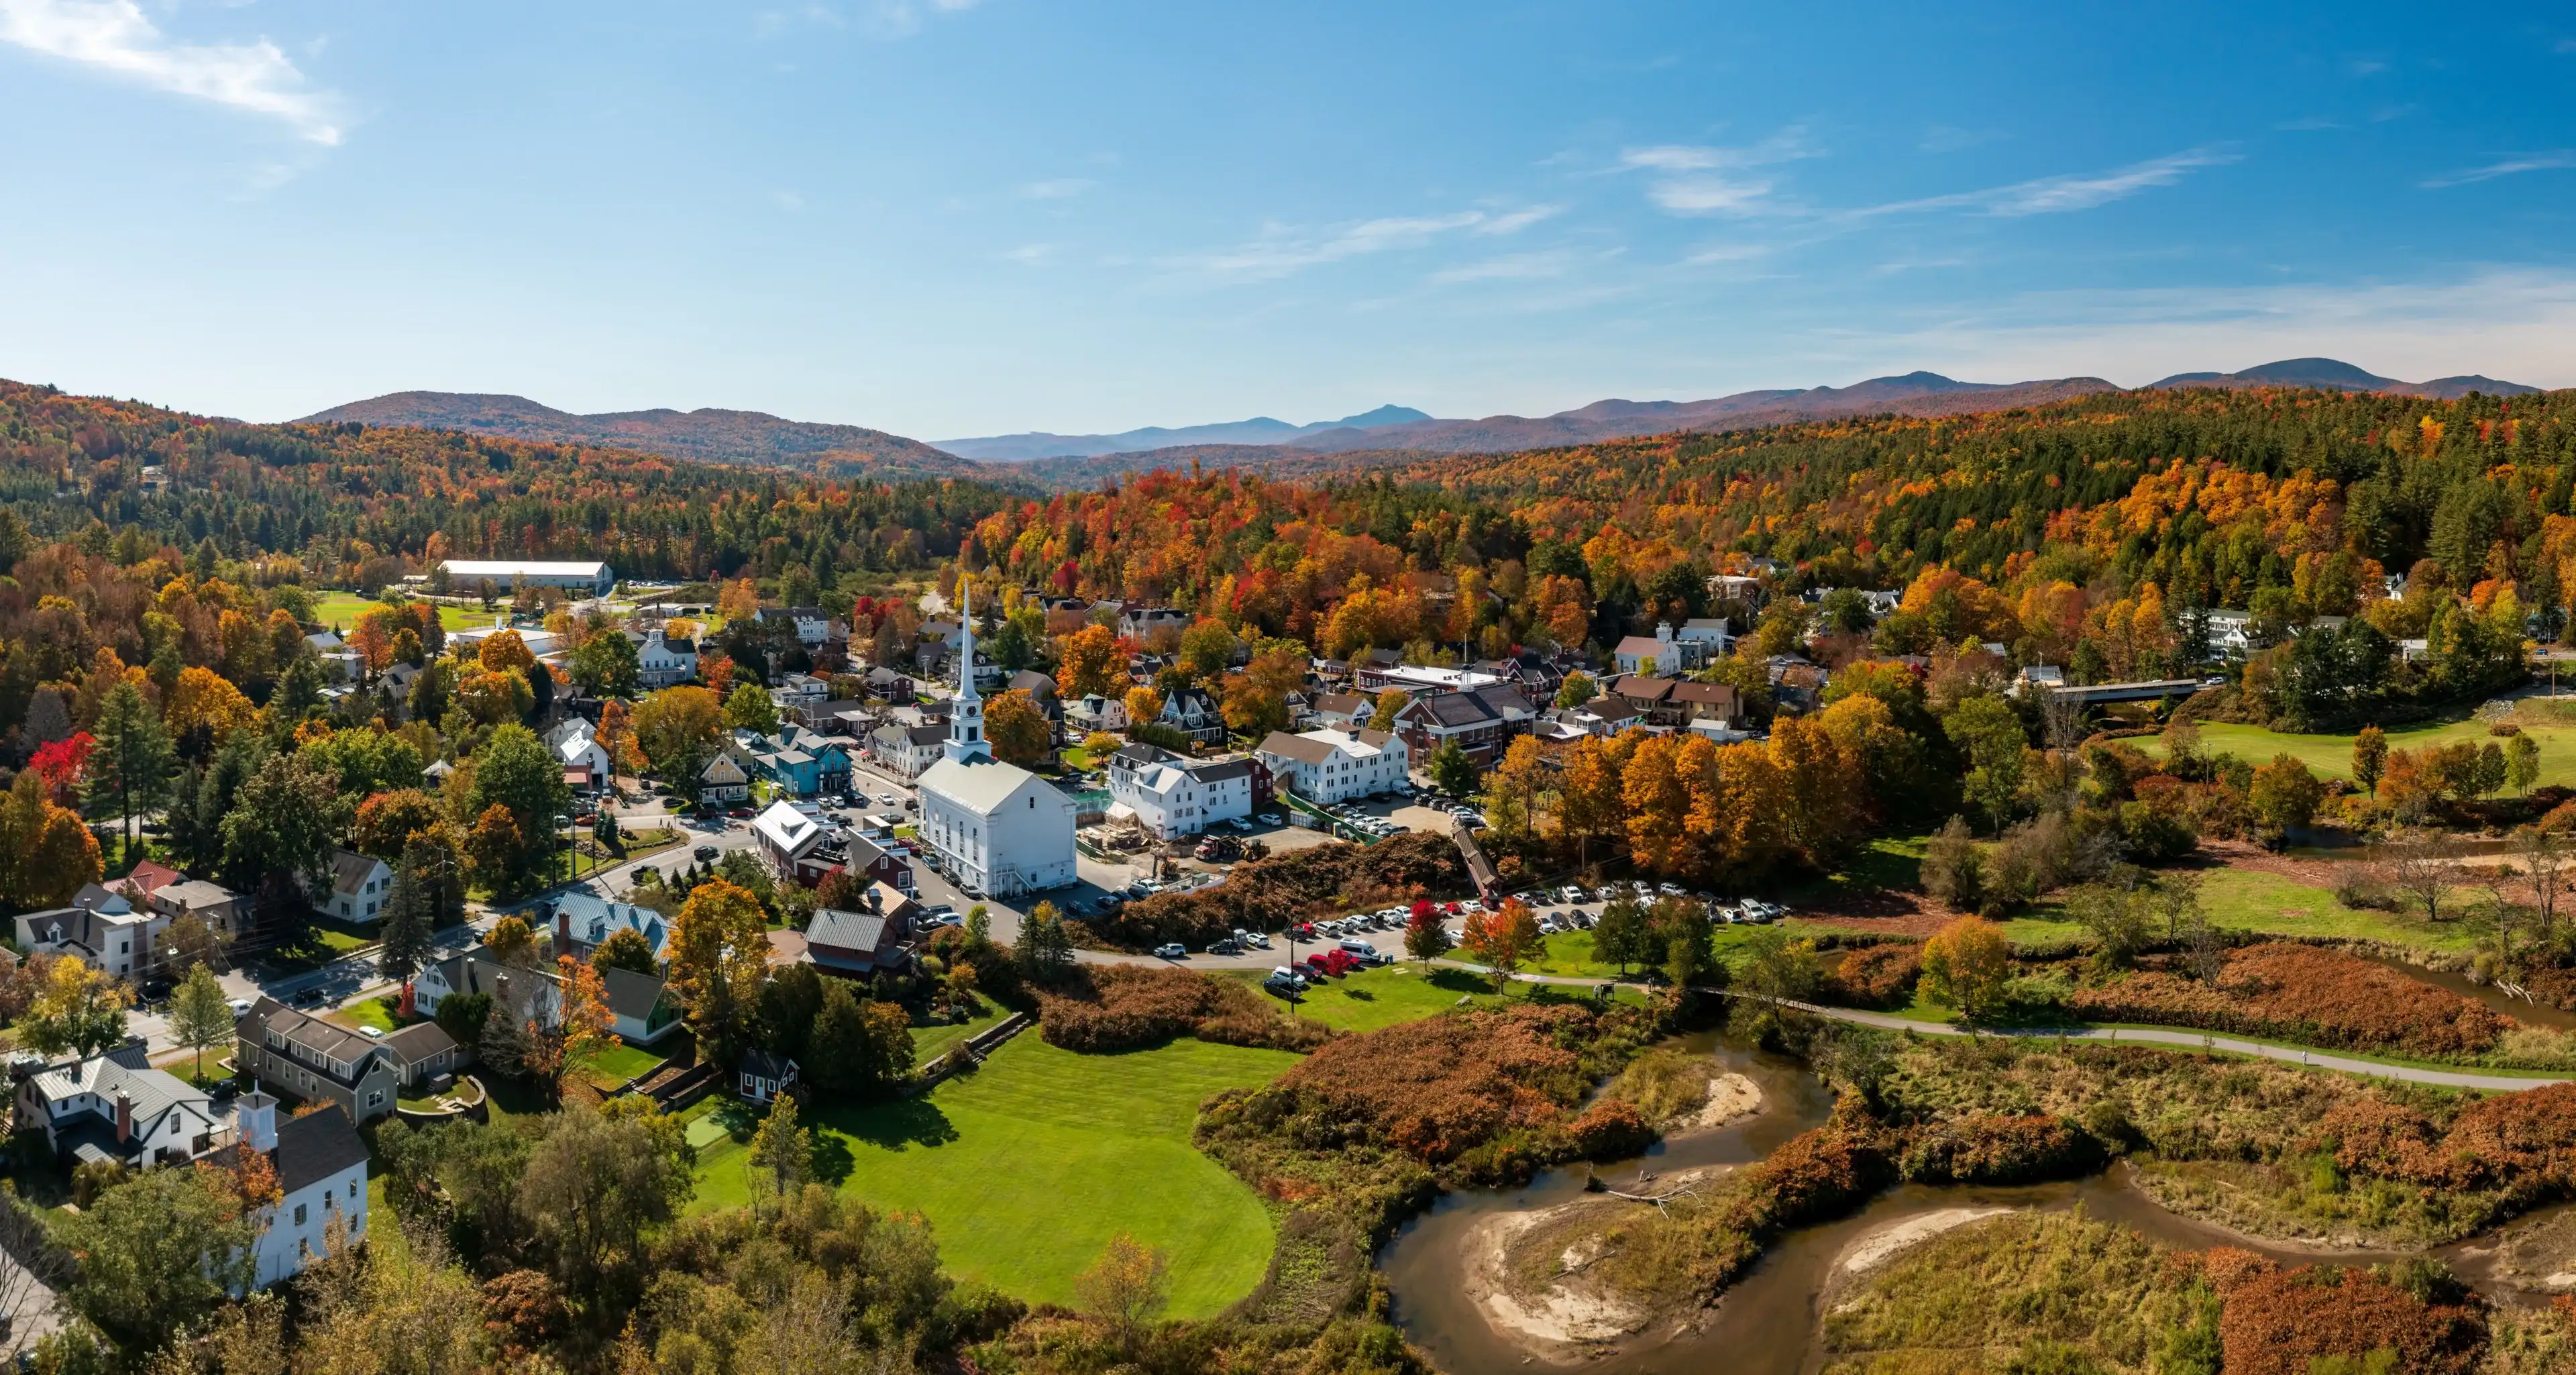 Best Stowe hotels. Cheap hotels in Stowe, Vermont, United States